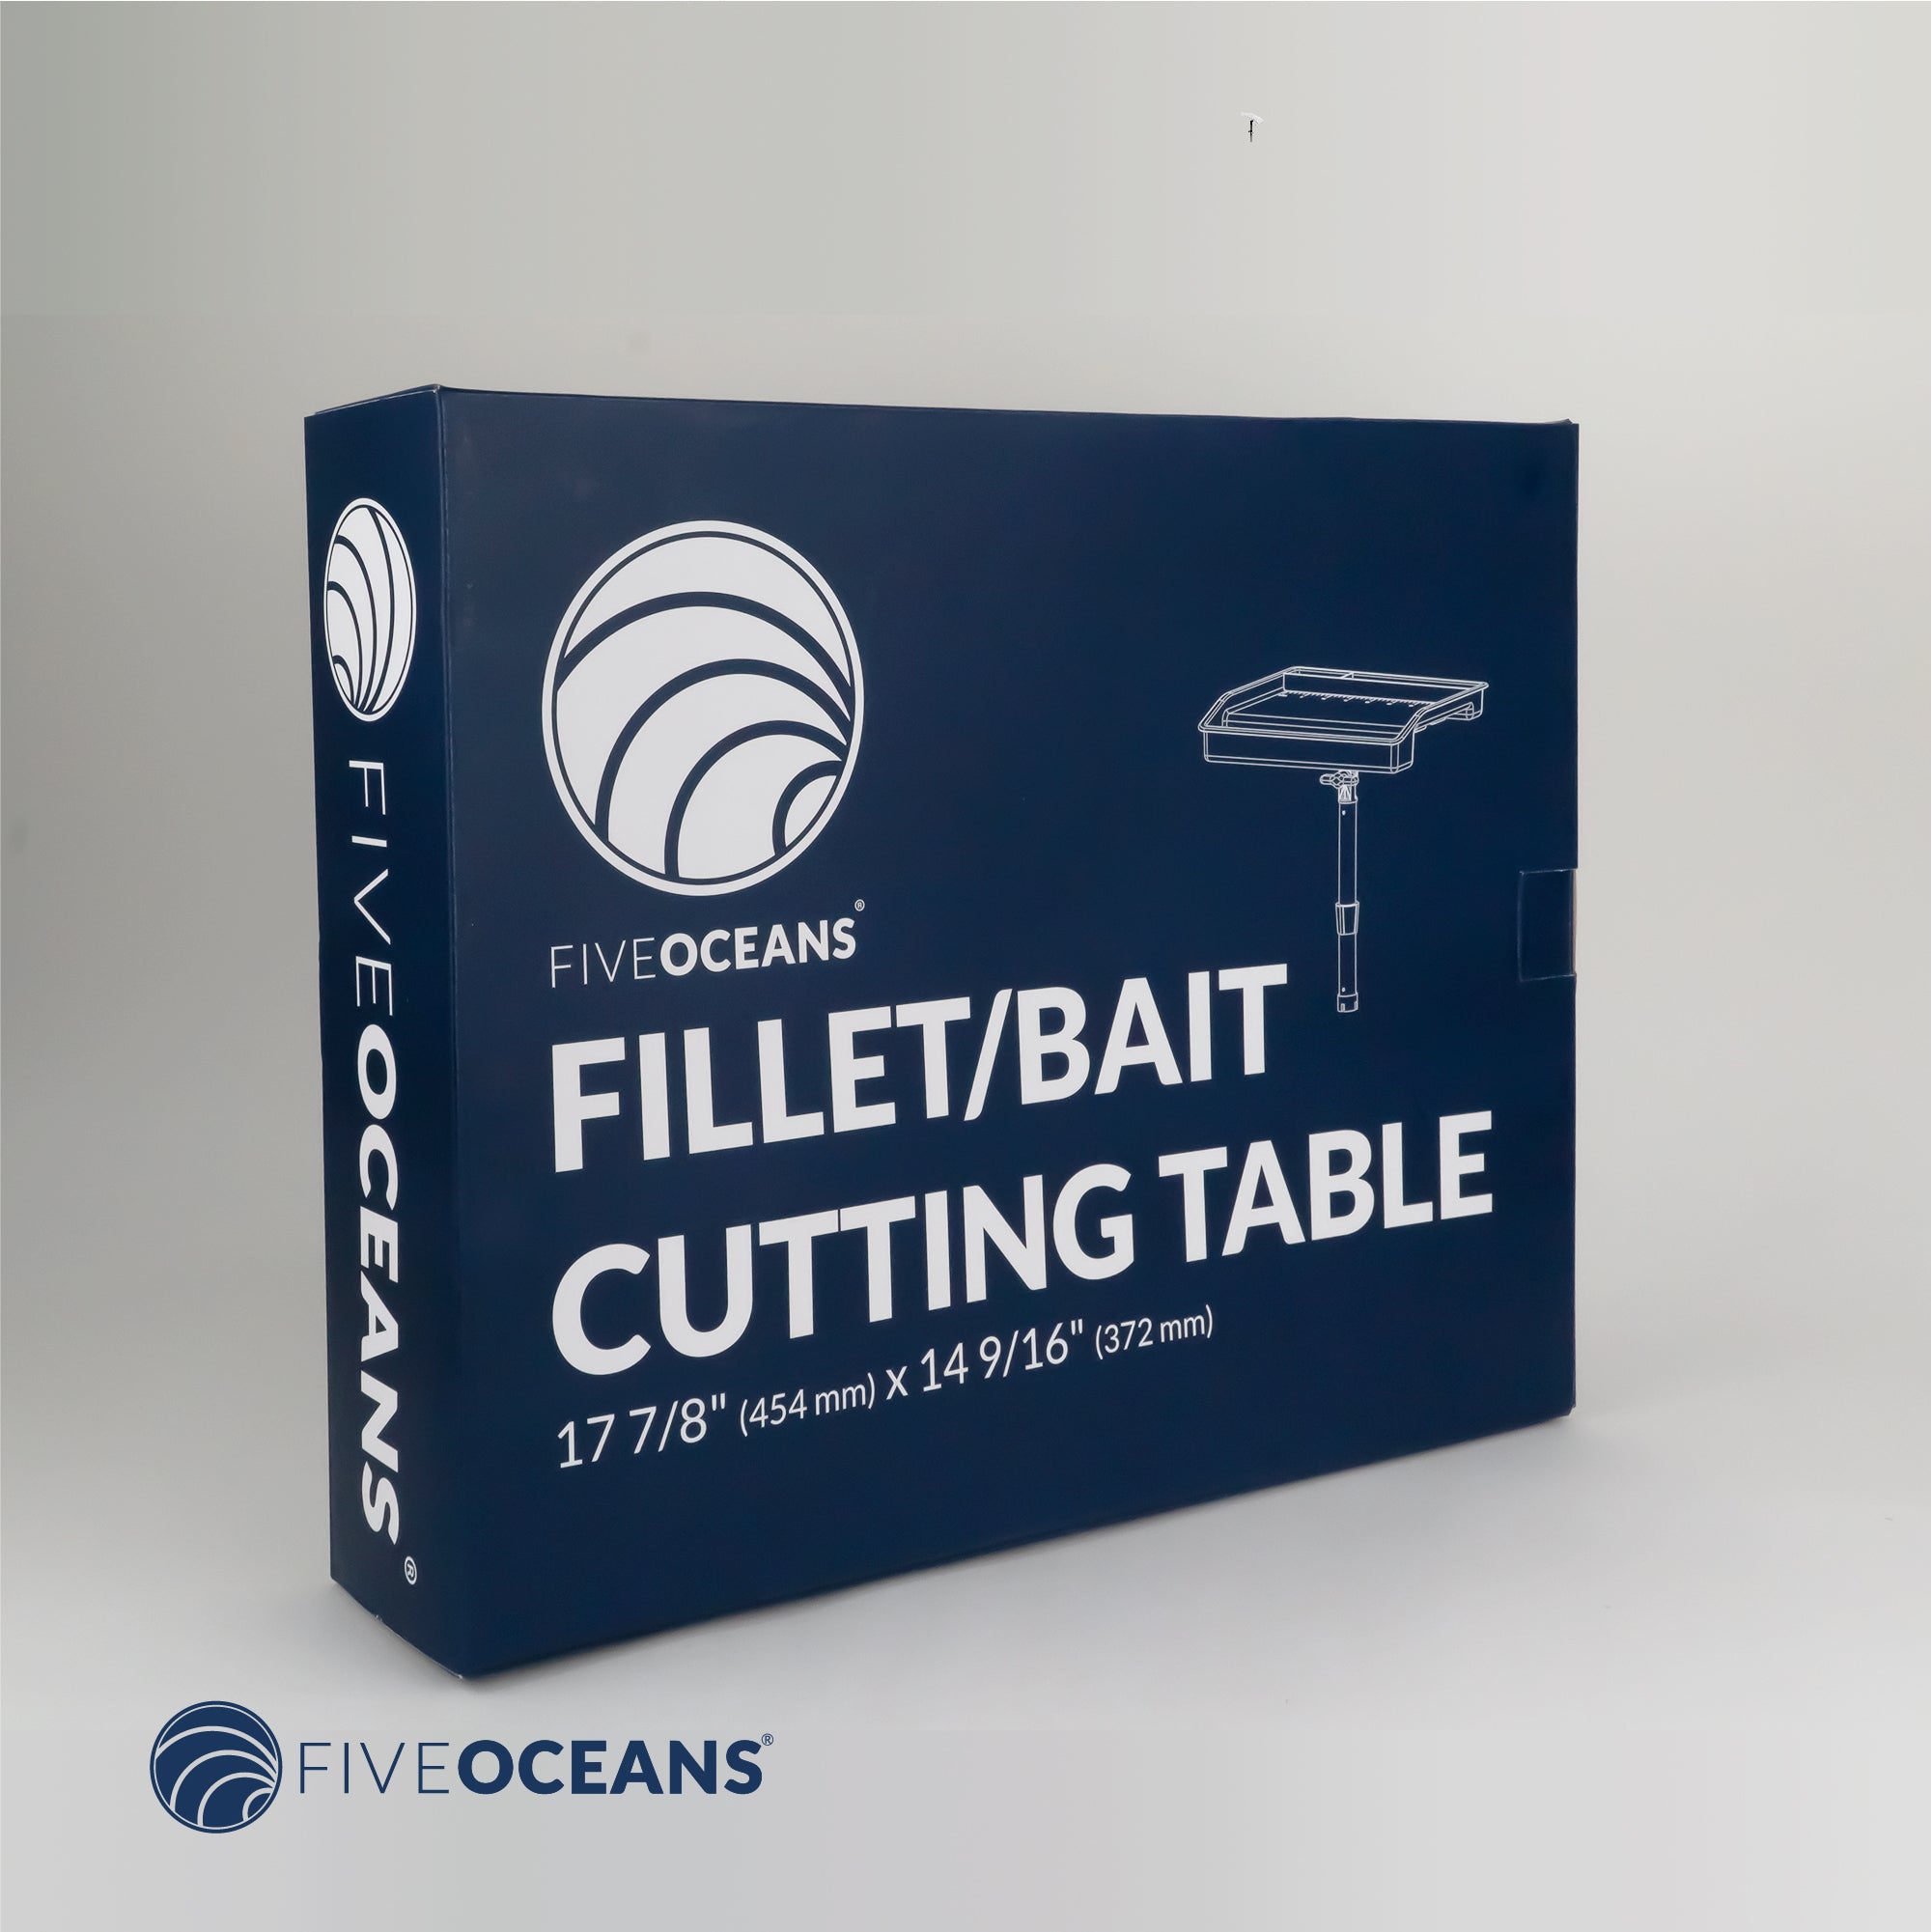 Boat Cutting Board, Fillet Table, 6-pack - FO4298-M6